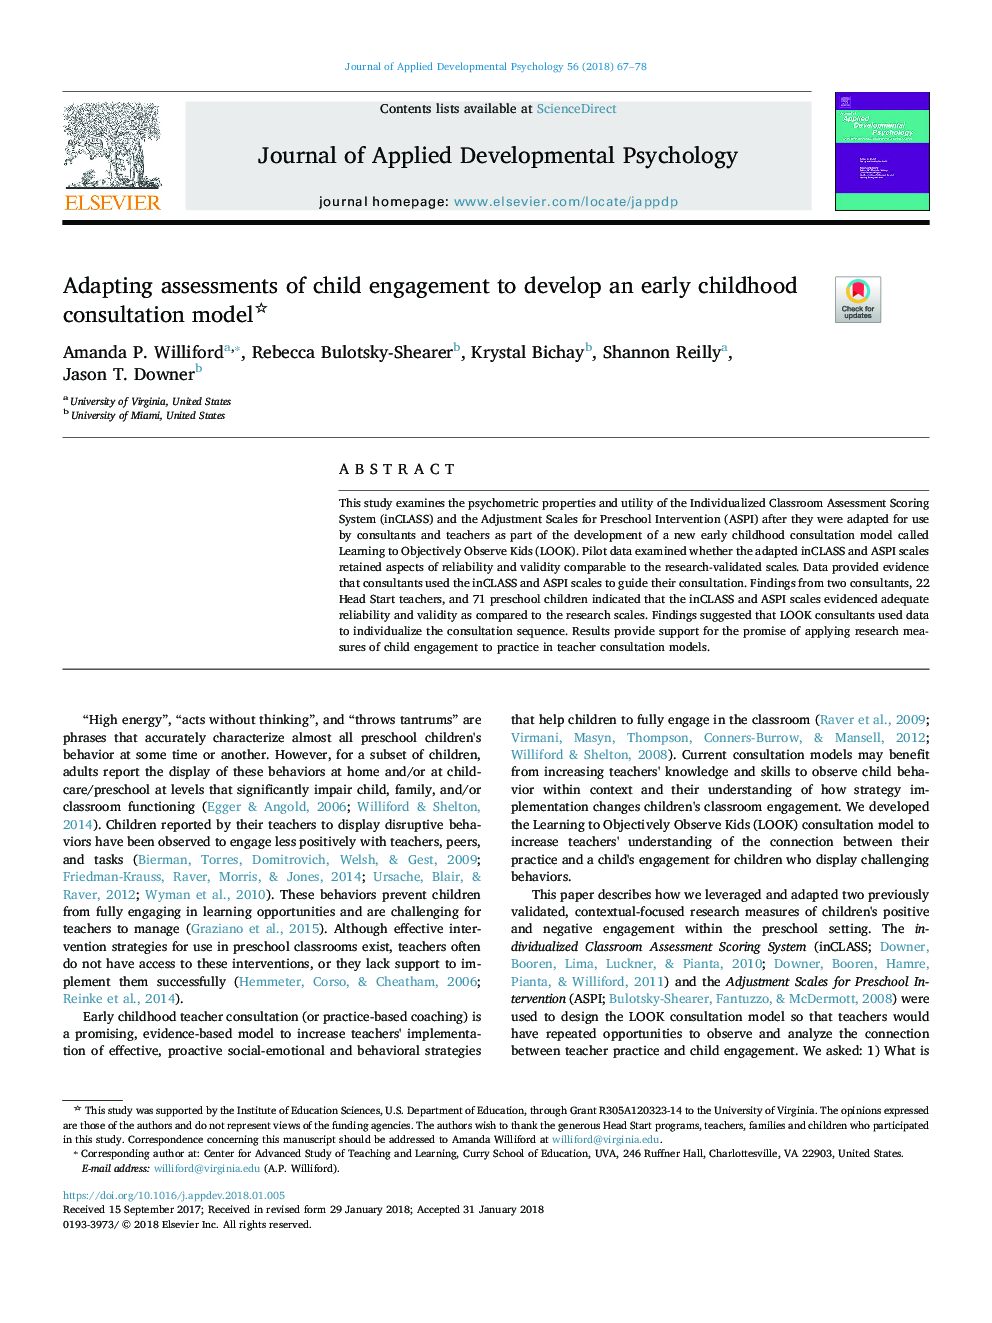 Adapting assessments of child engagement to develop an early childhood consultation model